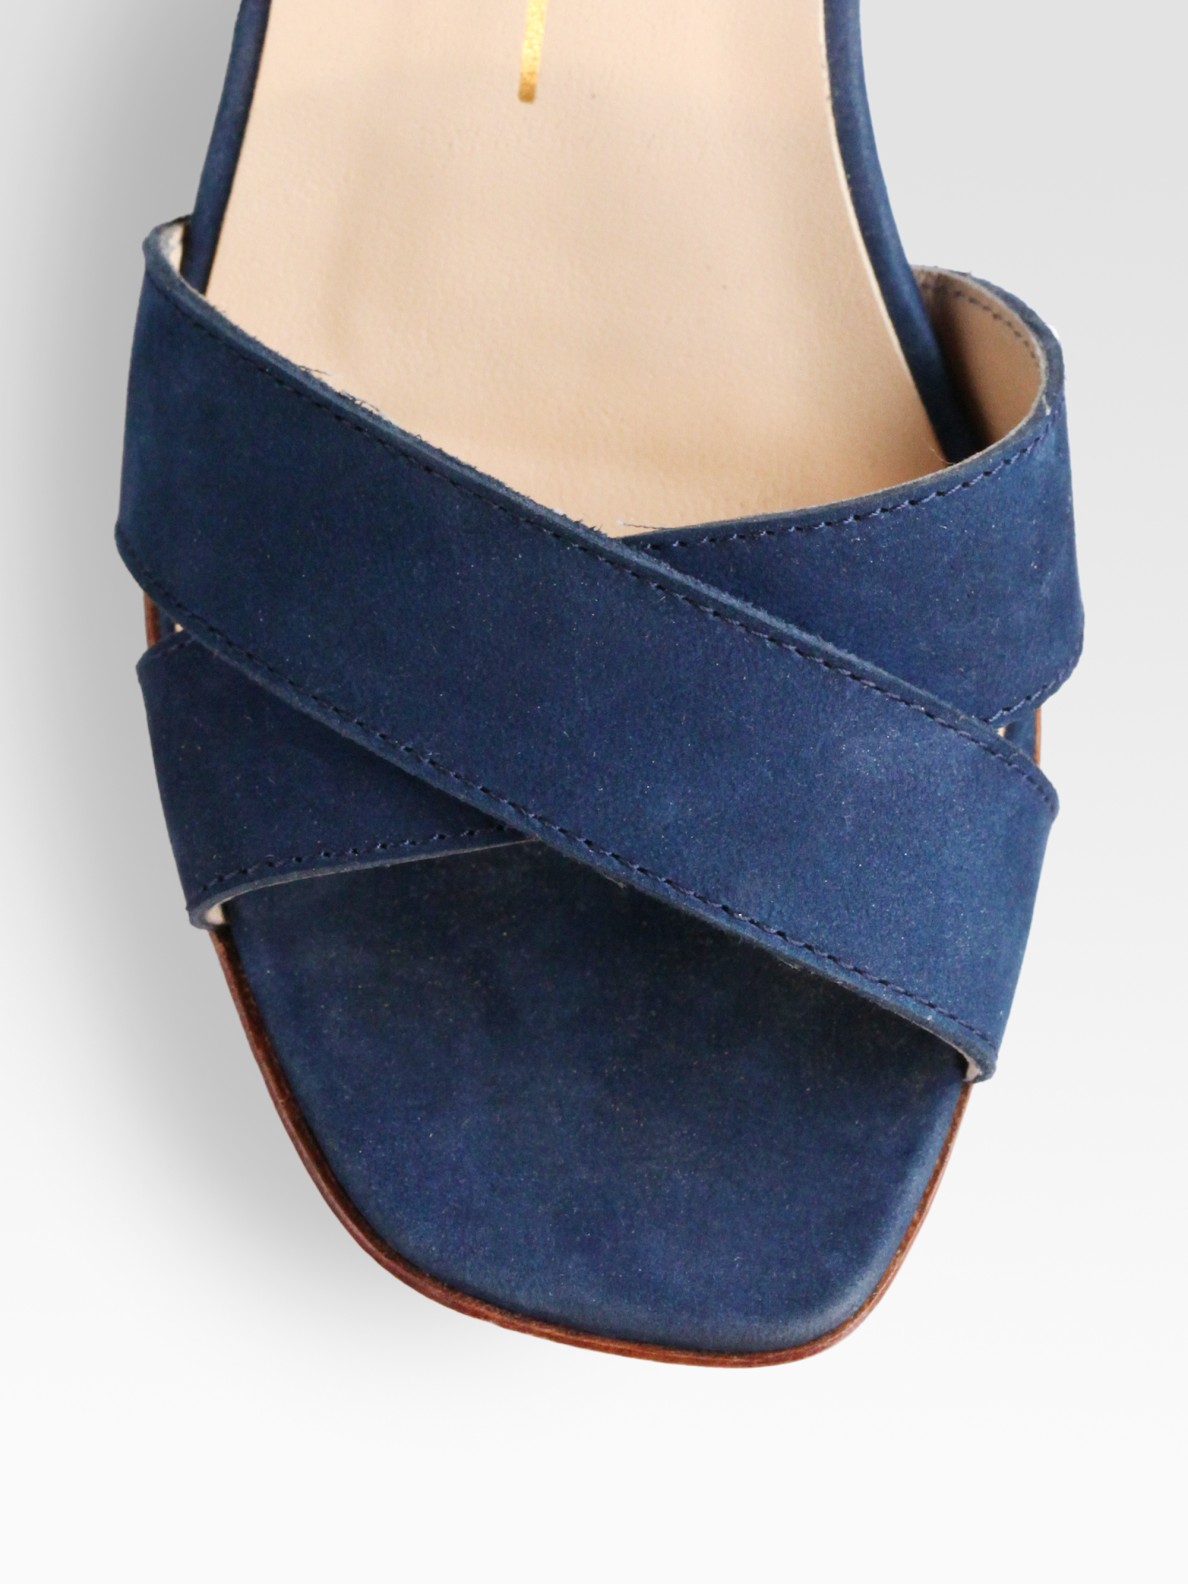 Lyst - Dolce Vita Suede Cutout Wedge Sandals in Blue